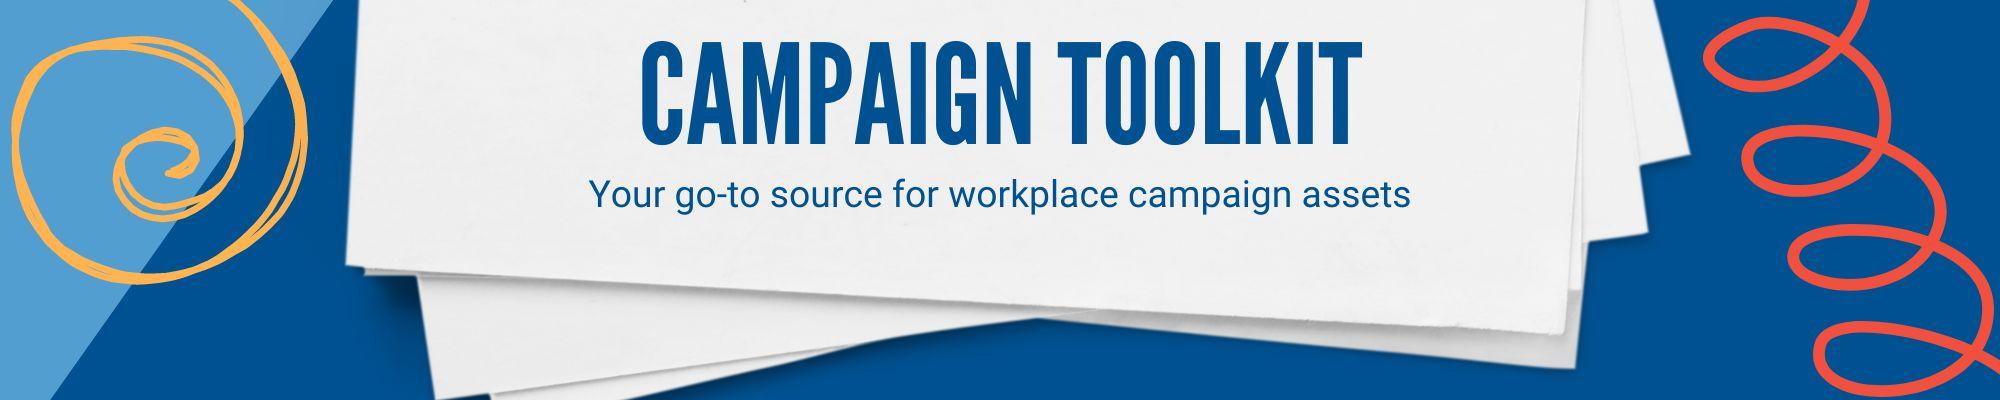 Campaign toolkit - your go-to source for workplace campaign assets